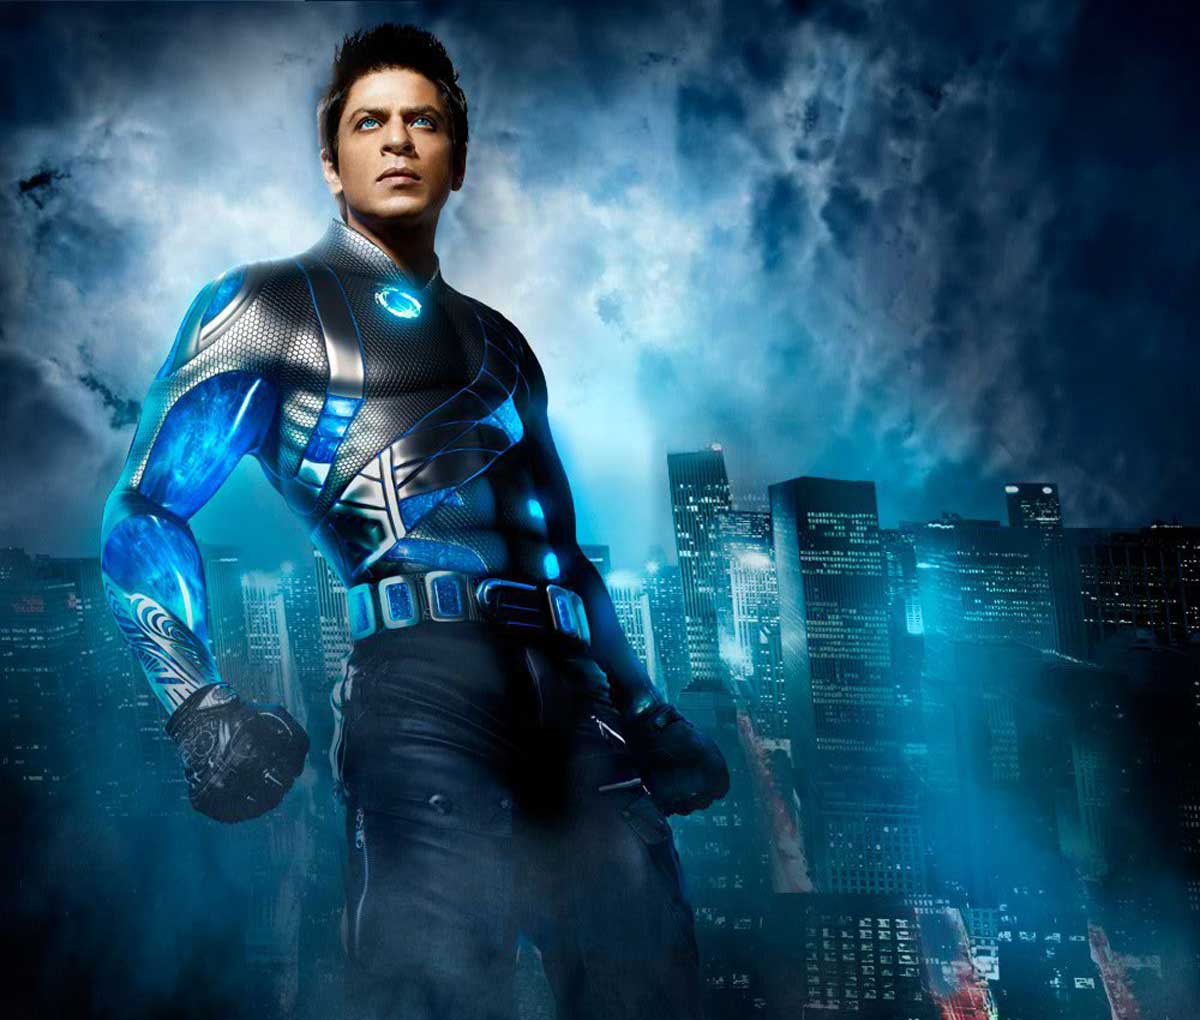 ra one hd wallpaper,movie,action adventure game,fictional character,superhero,digital compositing